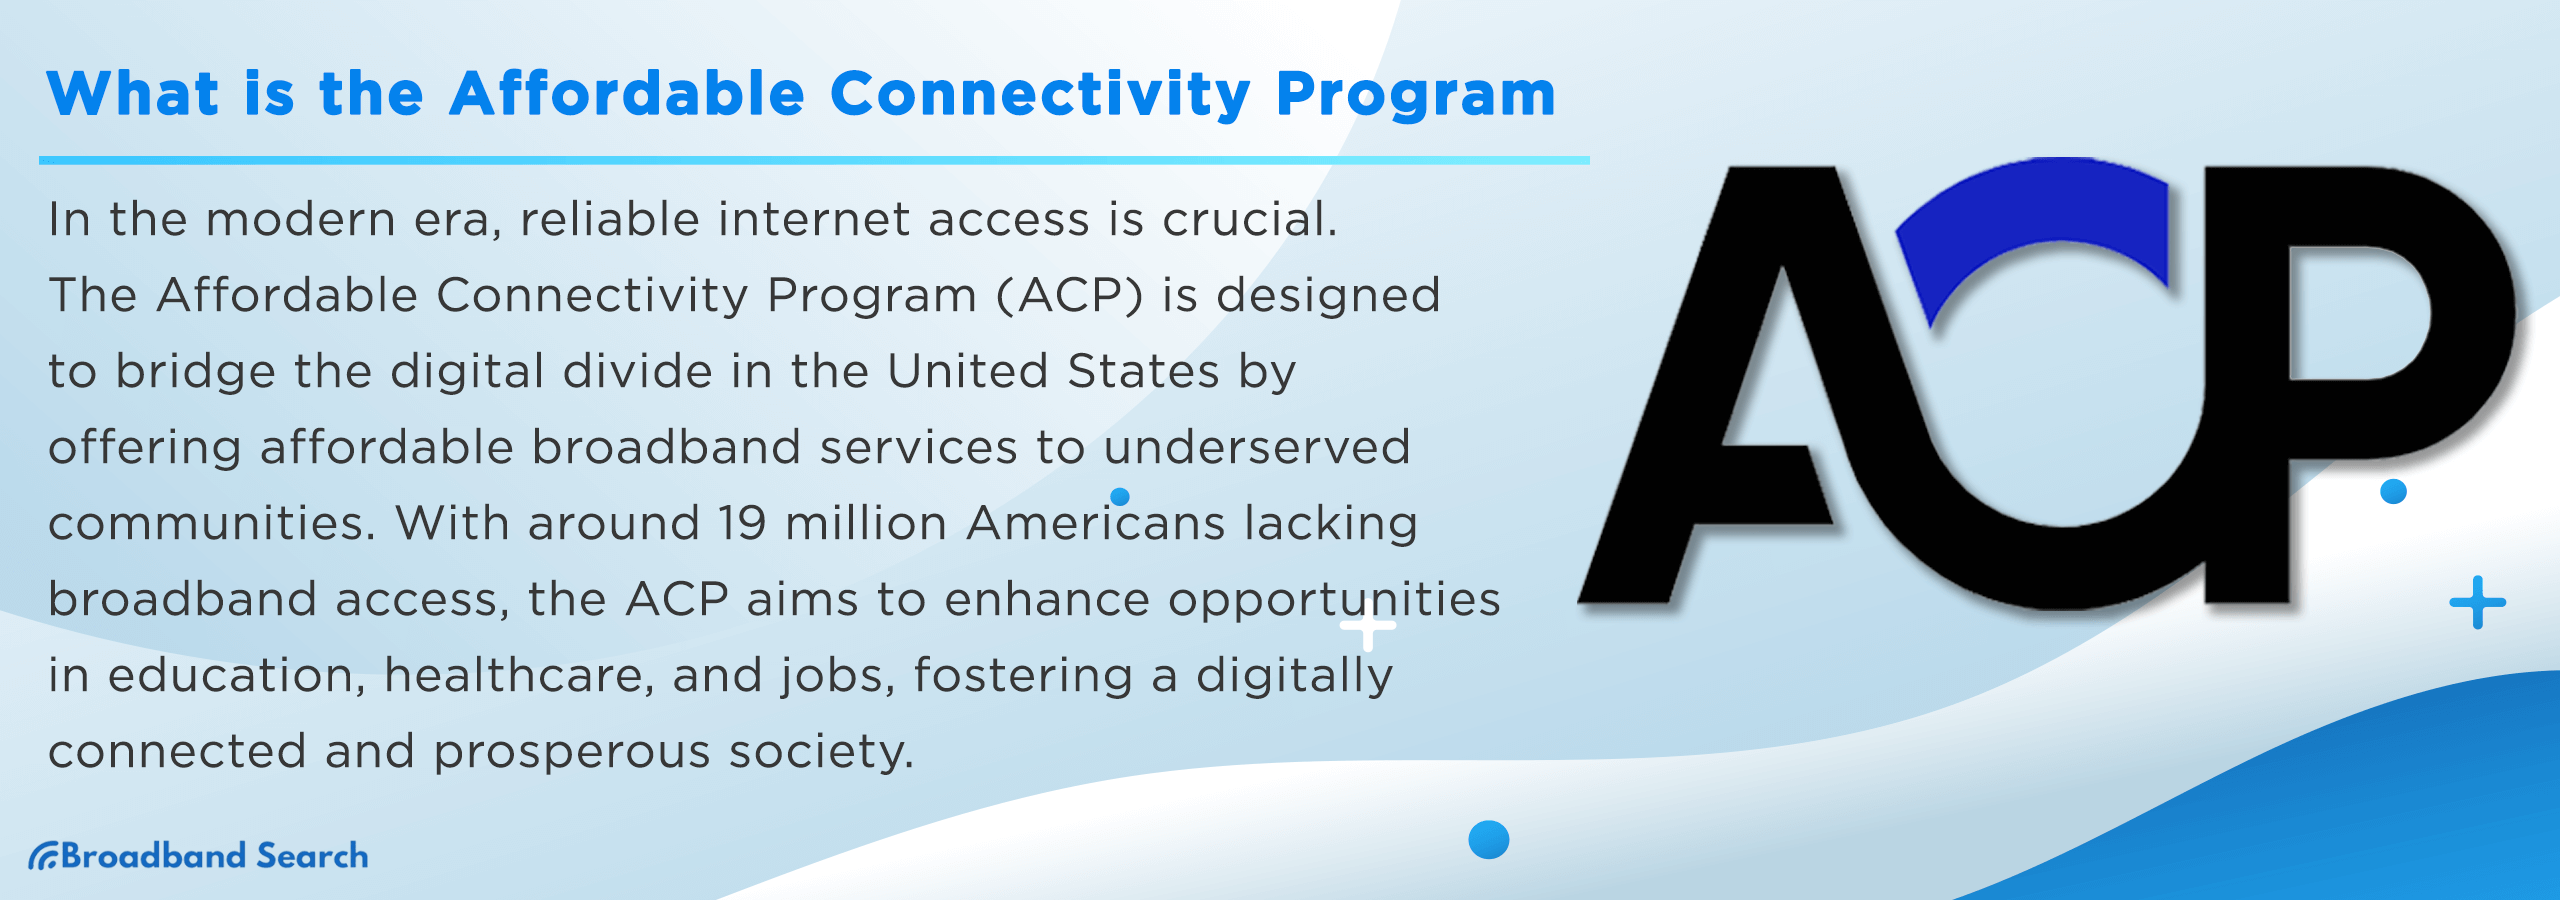 What is the Affordable Connectivity Program